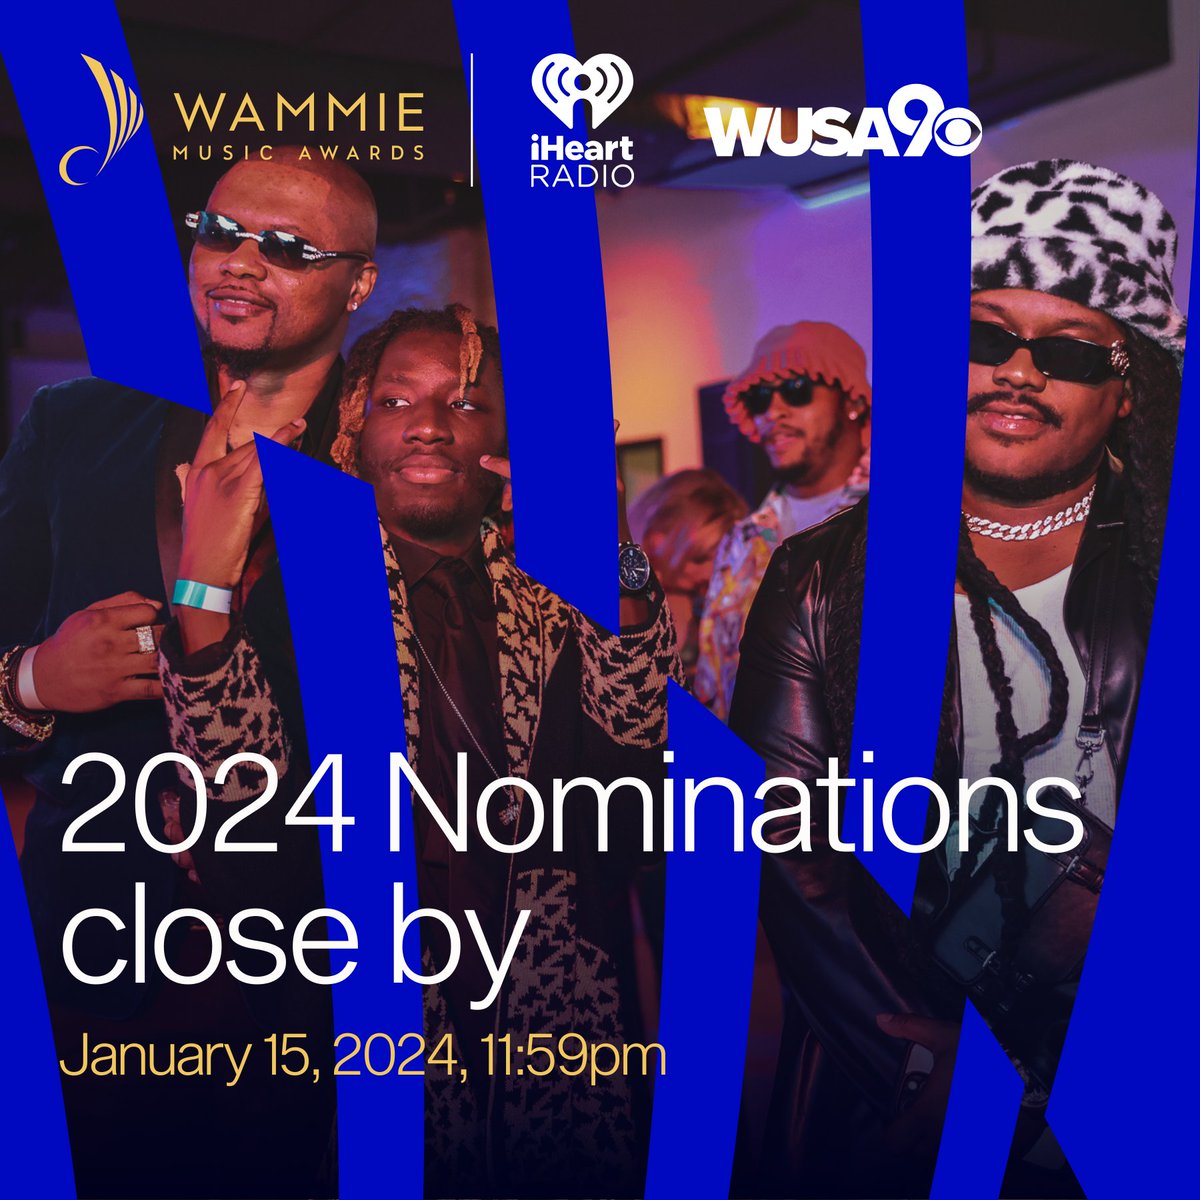 Get ready to make your voice heard at the 2024 Wammie Music Awards! 🎵🏆 Time is running out to nominate your favorite DMV artist. Don't miss out - head to wammiesdc.org to submit your nominations today! #WammieMusicAwards #DMVtalent #NominateNow